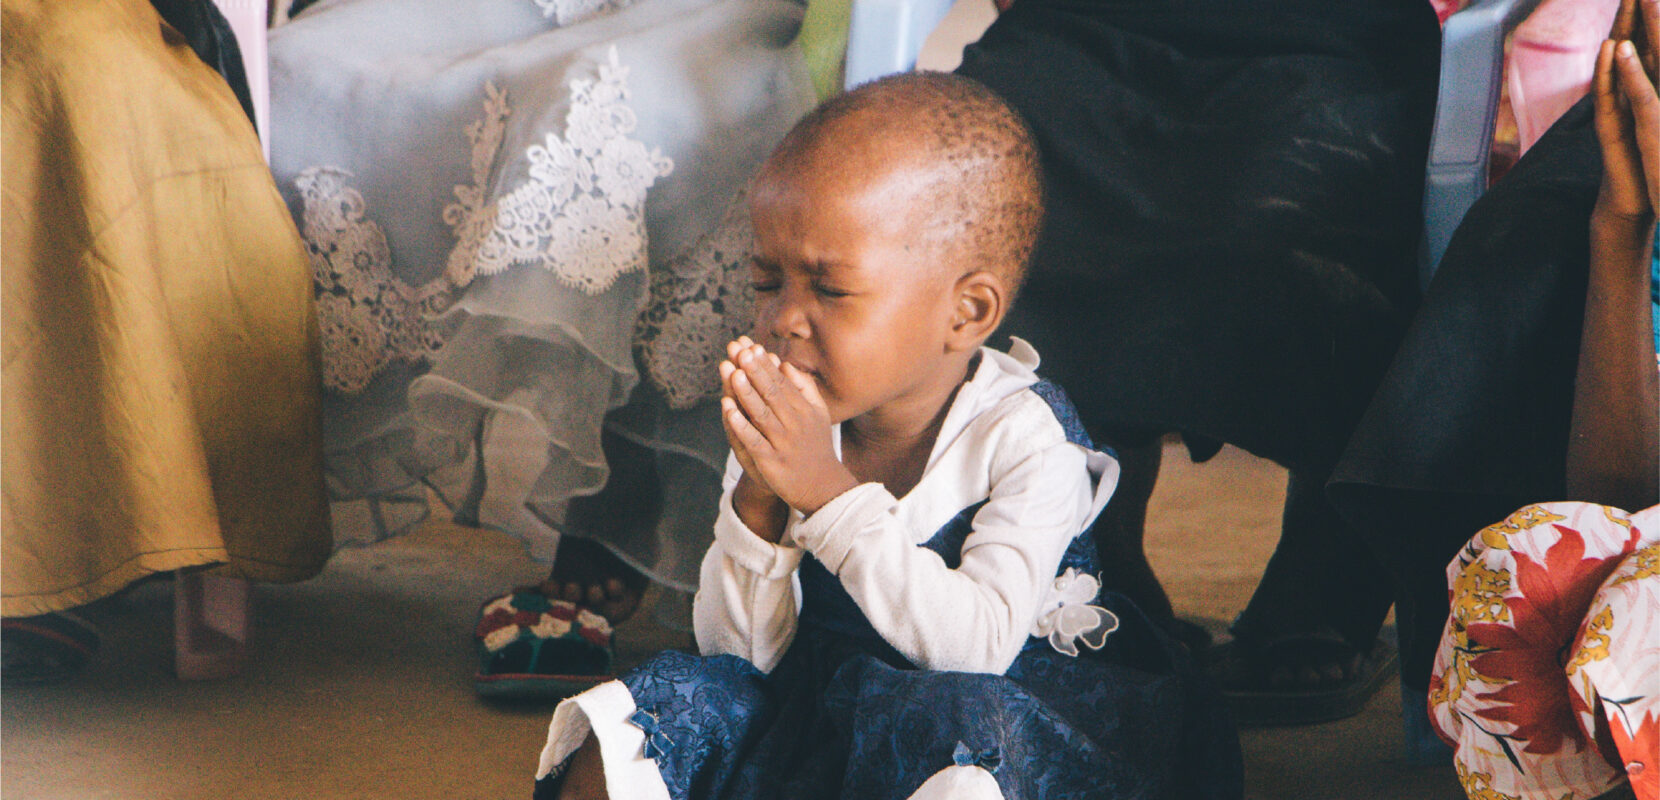 a young child sitting on the floor praying